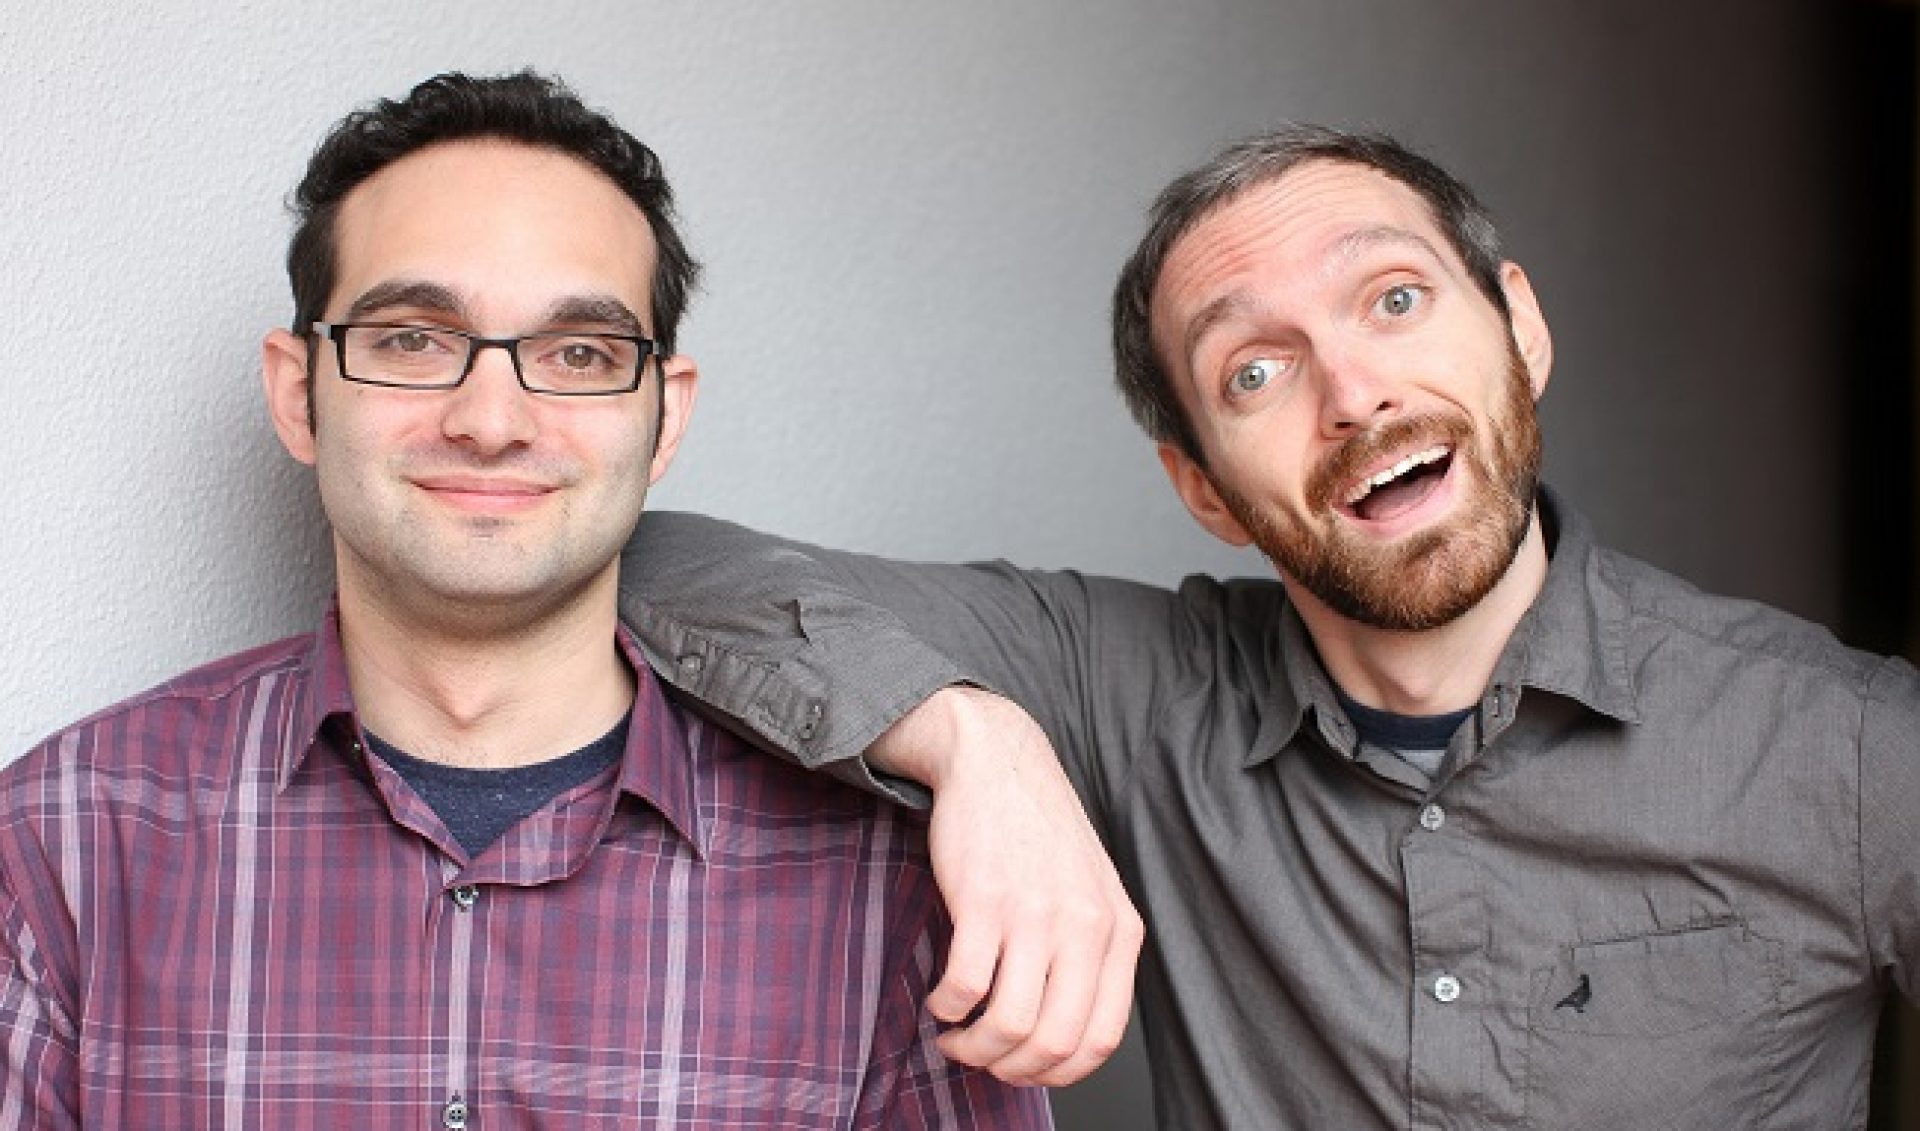 The Fine Bros. Are Making A Movie